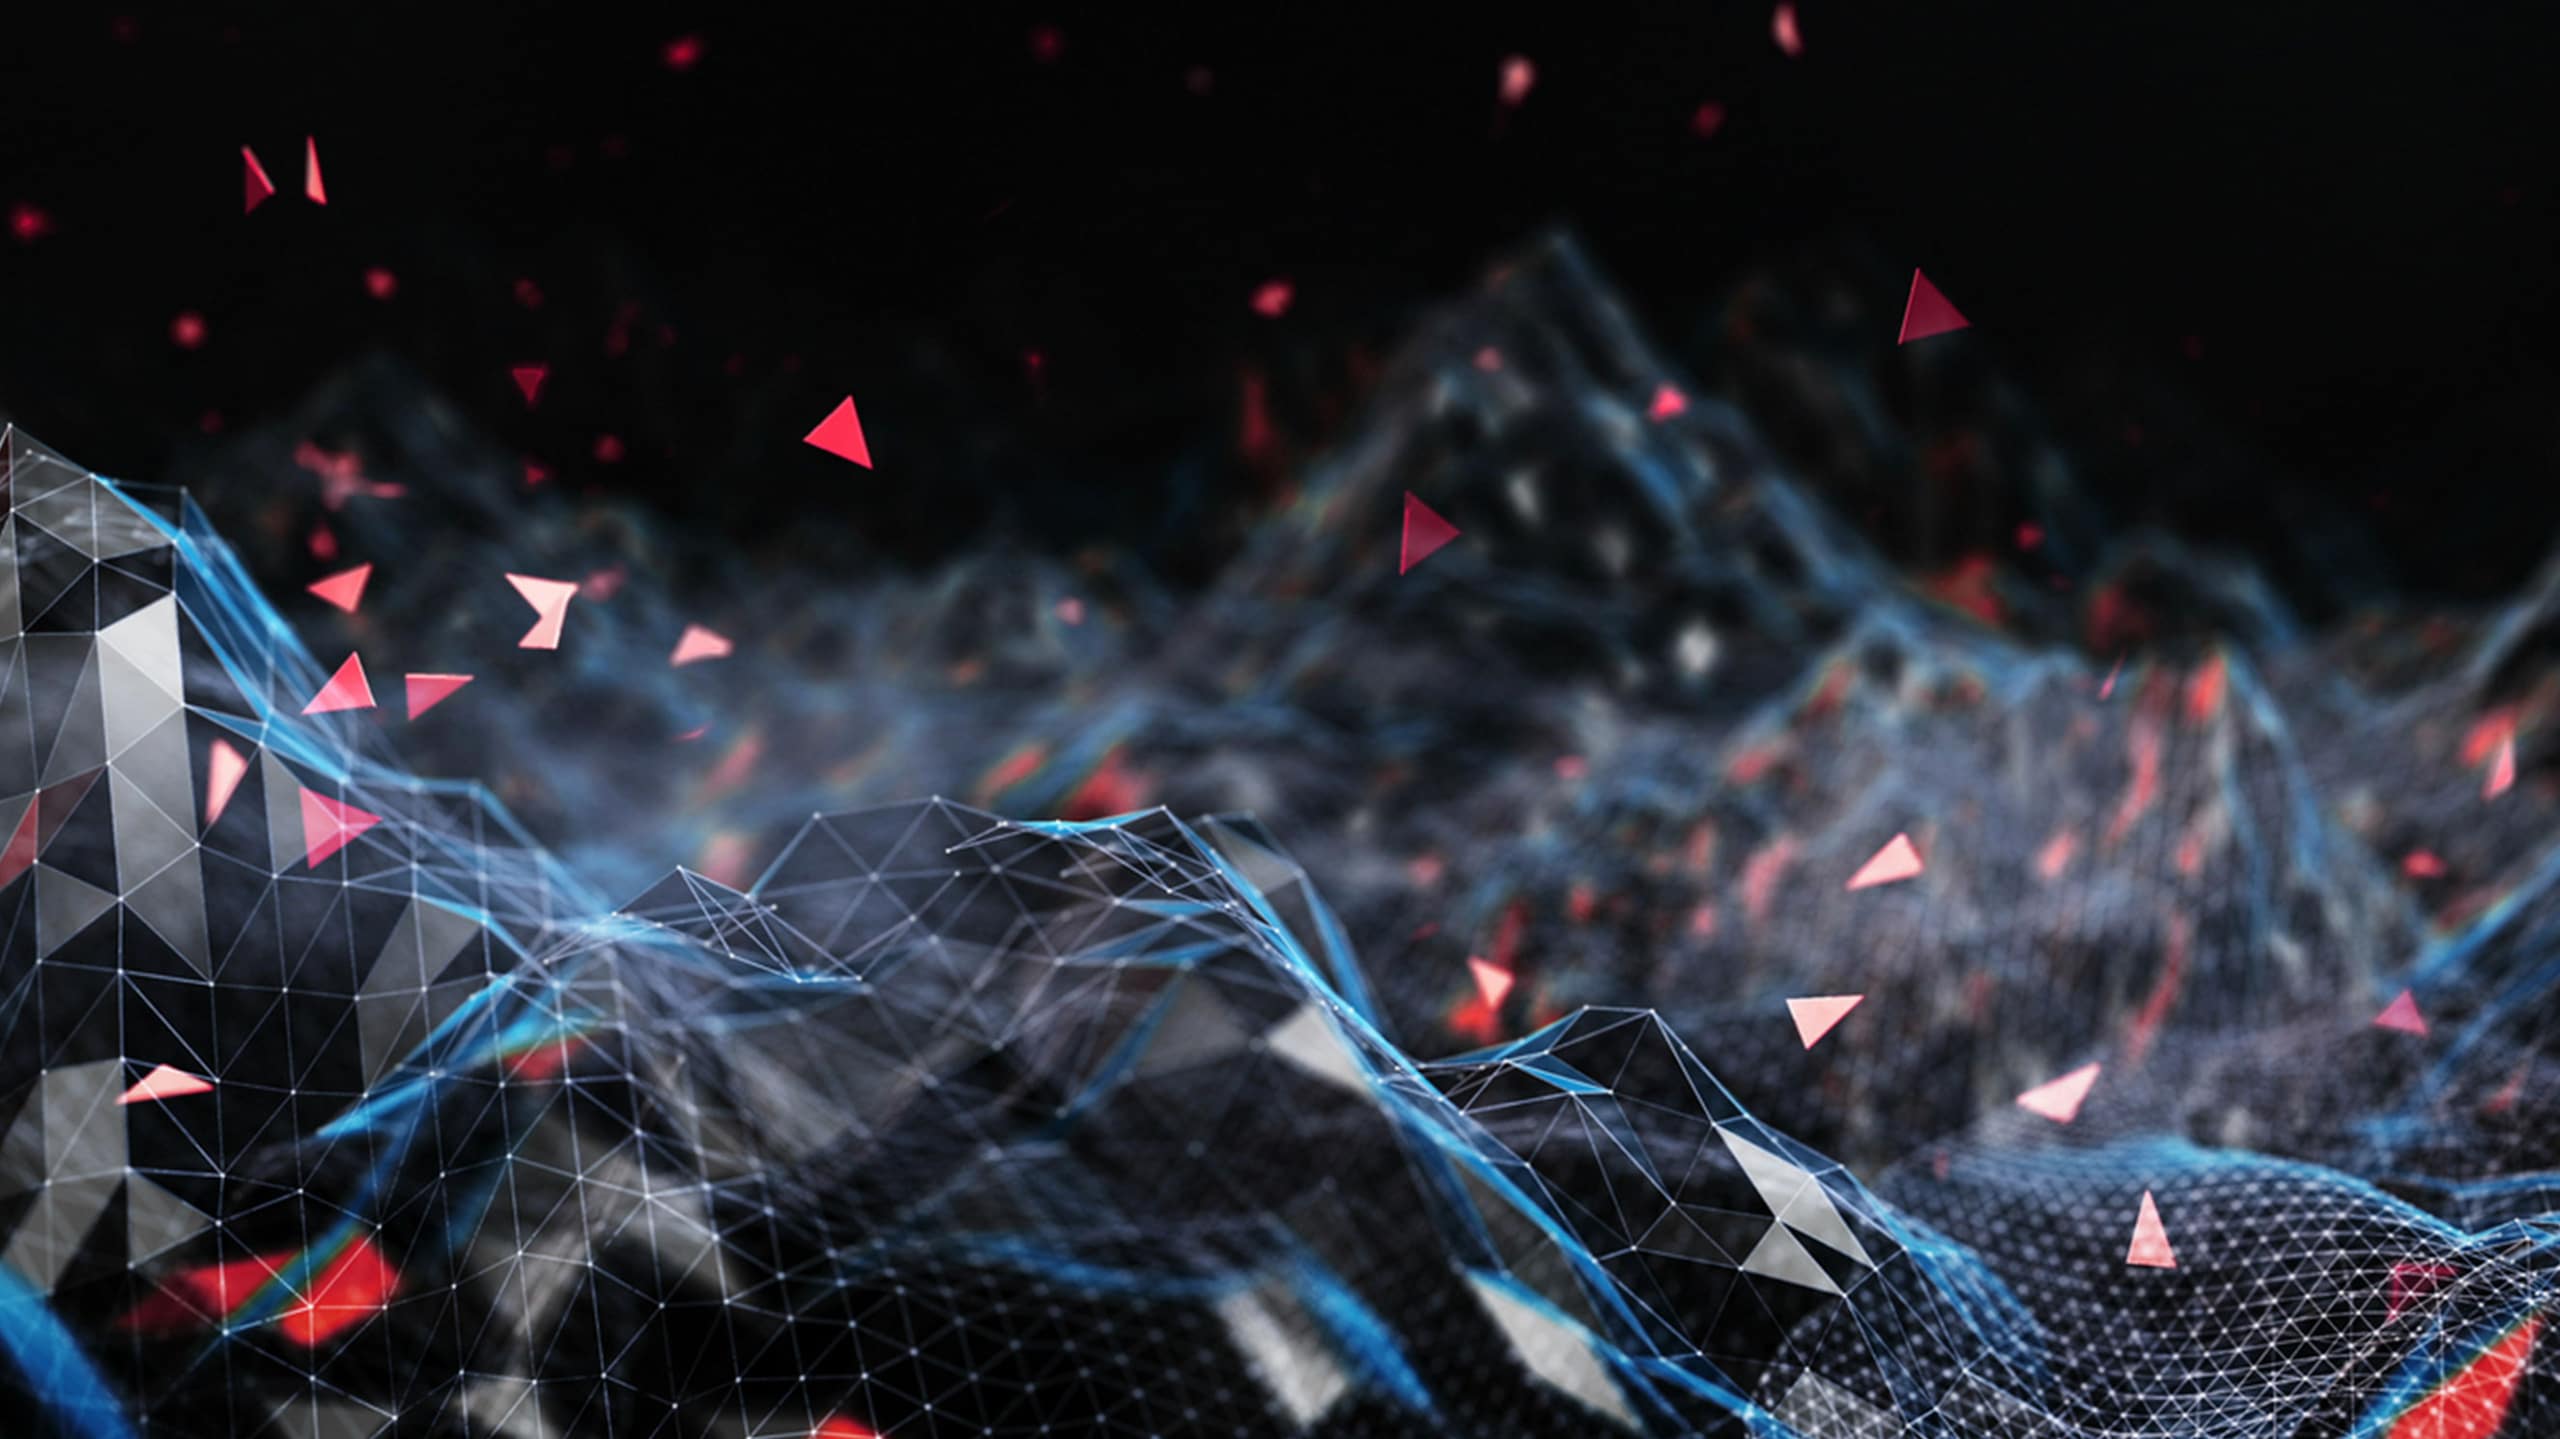 Abstract digital landscape with dynamic blue mesh grid and floating red geometric shapes on a dark background, conveying a sense of futuristic technology and Mastodon data flow.